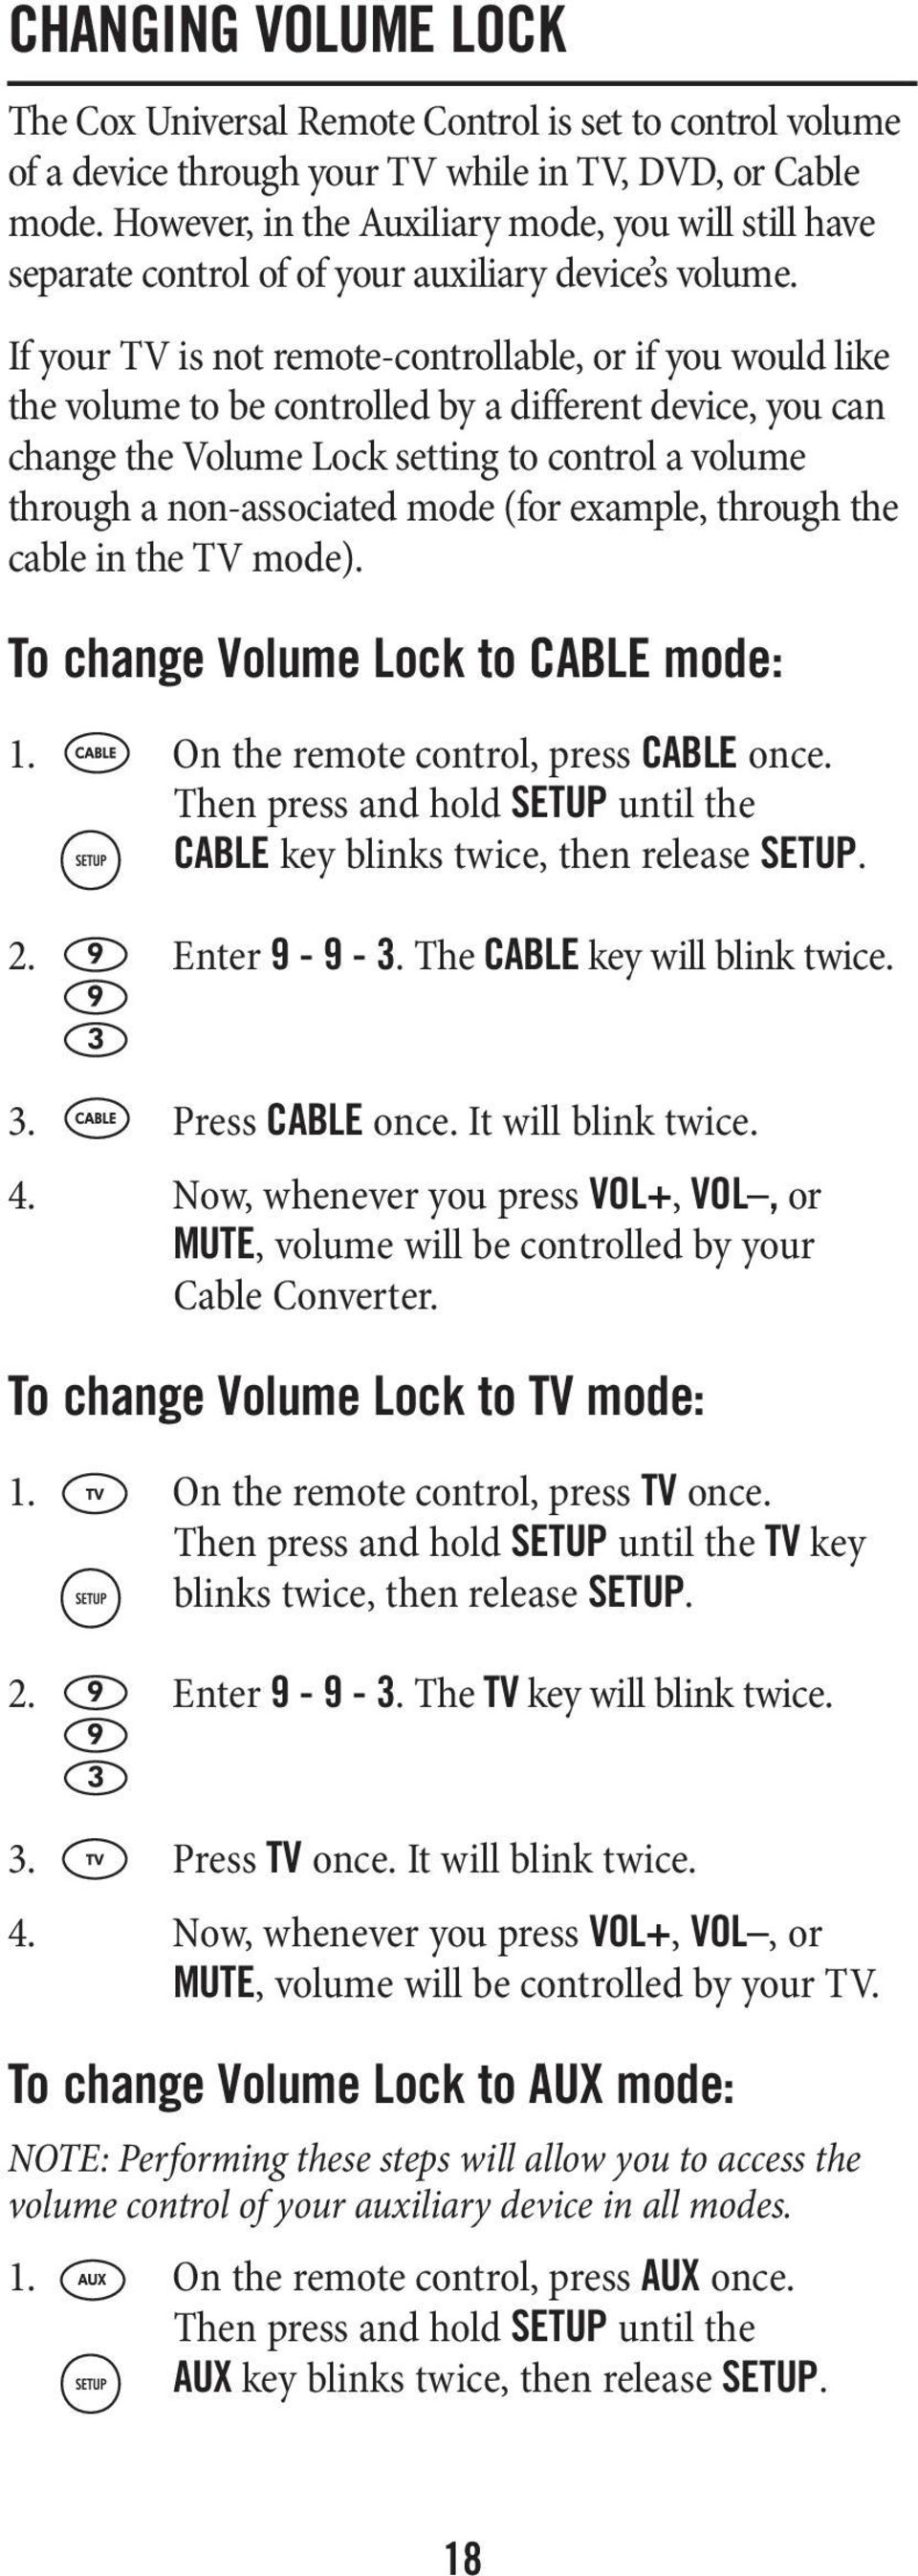 If your TV is not remote-controllable, or if you would like the volume to be controlled by a different device, you can change the Volume Lock setting to control a volume through a non-associated mode